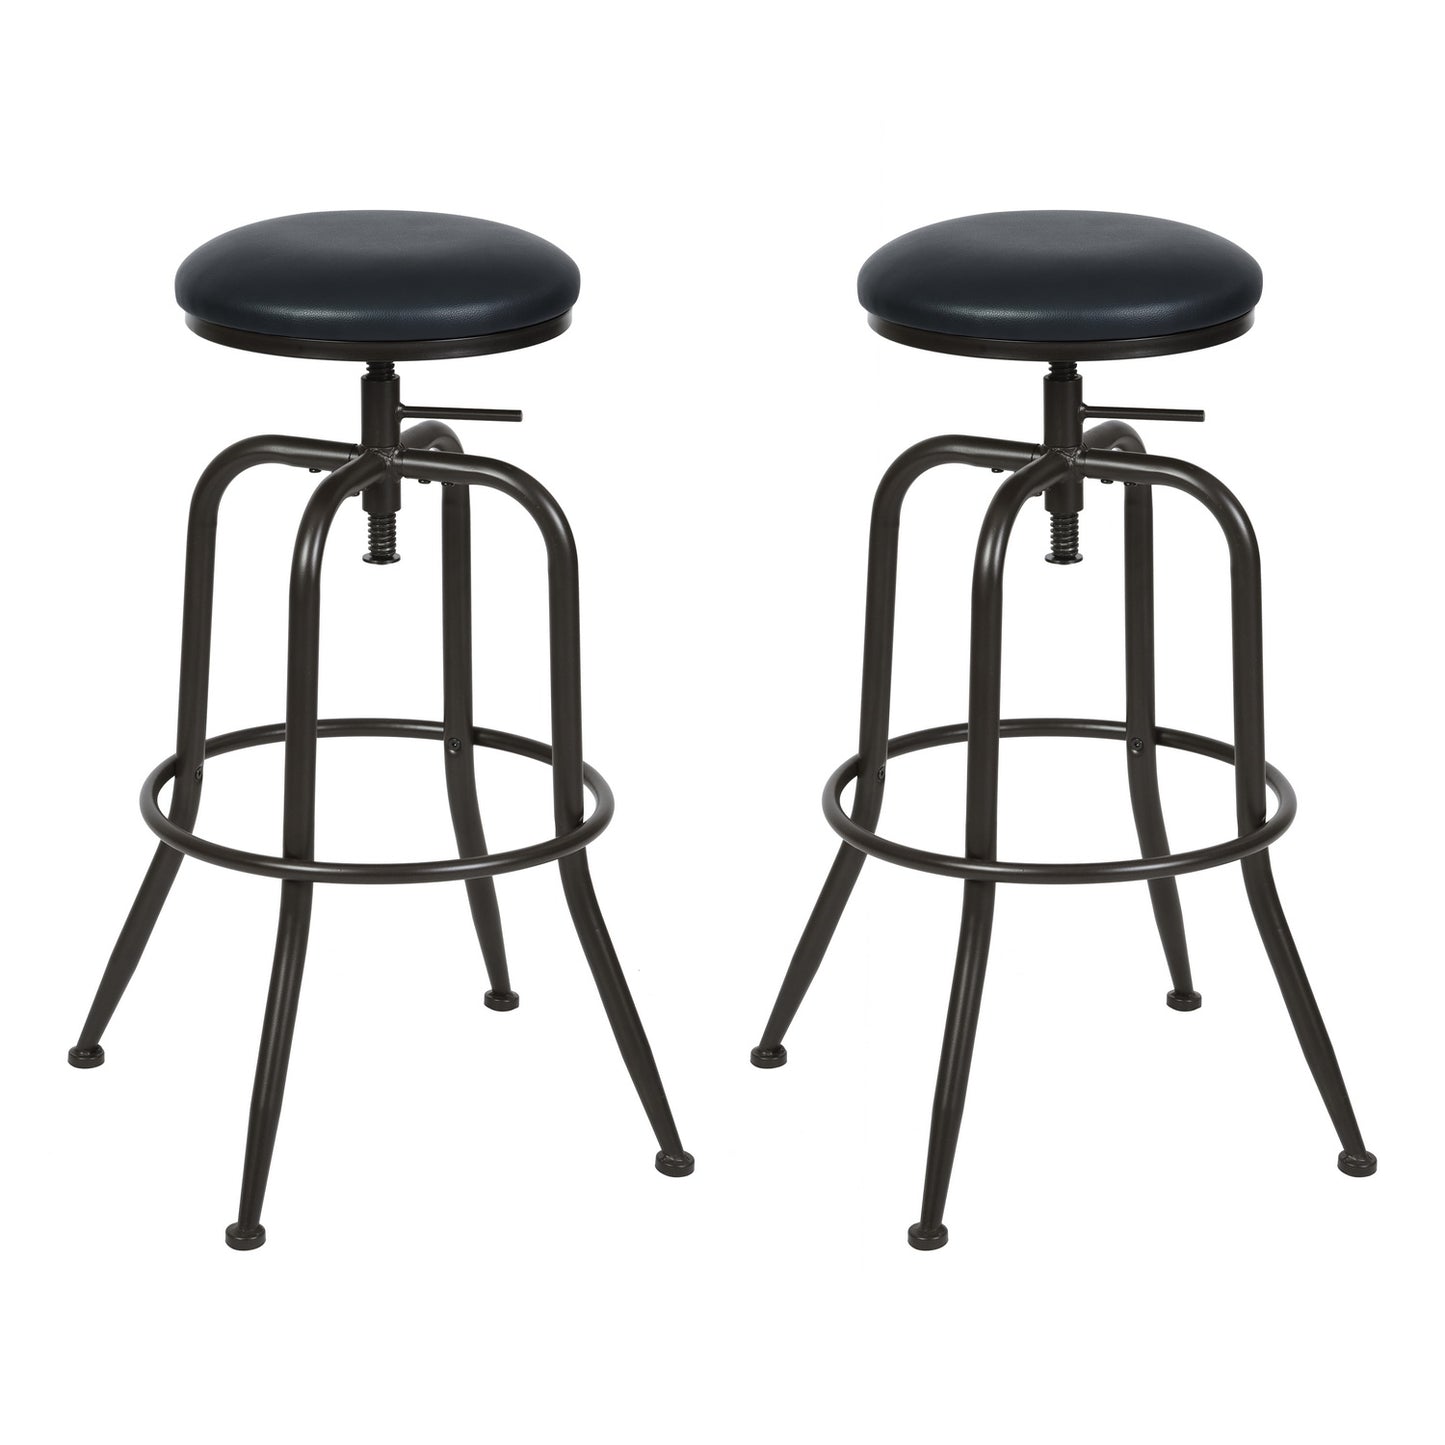 Set Of Two 30" Brown And Black Steel Swivel Backless Bar Chairs With Footrest